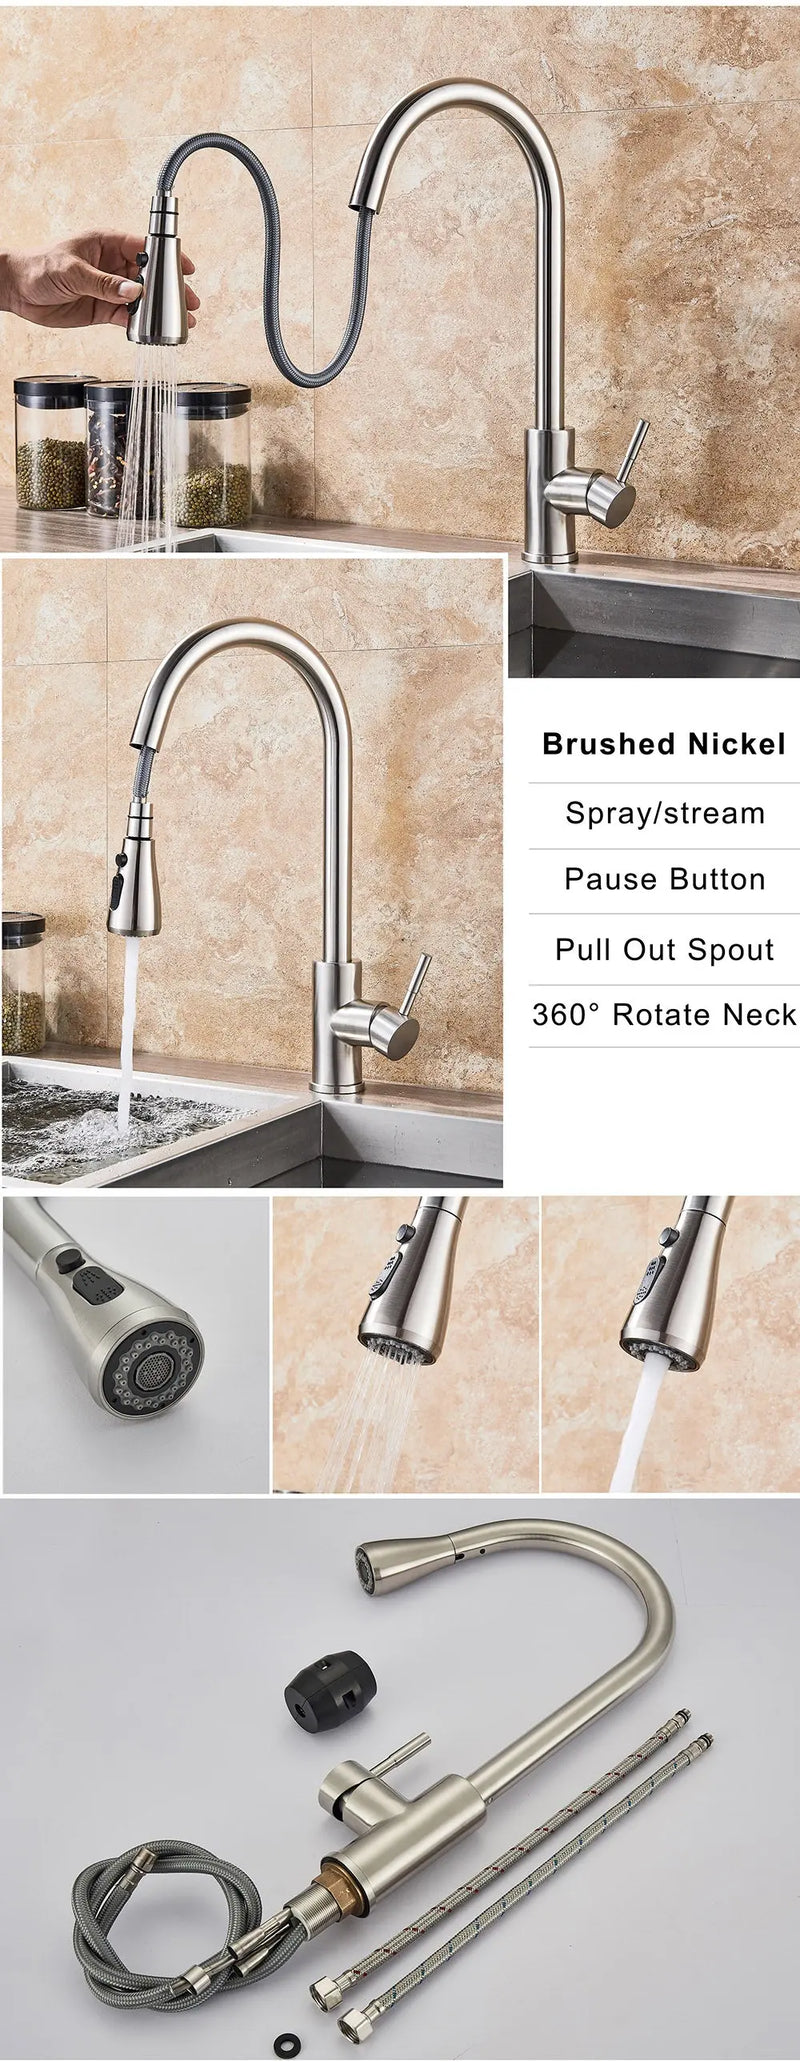 https://yeechop.com/search?type=product%2Carticle%2Cpage%2Ccollection&q=Brushed%20Nickel%20Single%20Hole%20Pull%20Out%20Spout%20Faucet%20KT20*